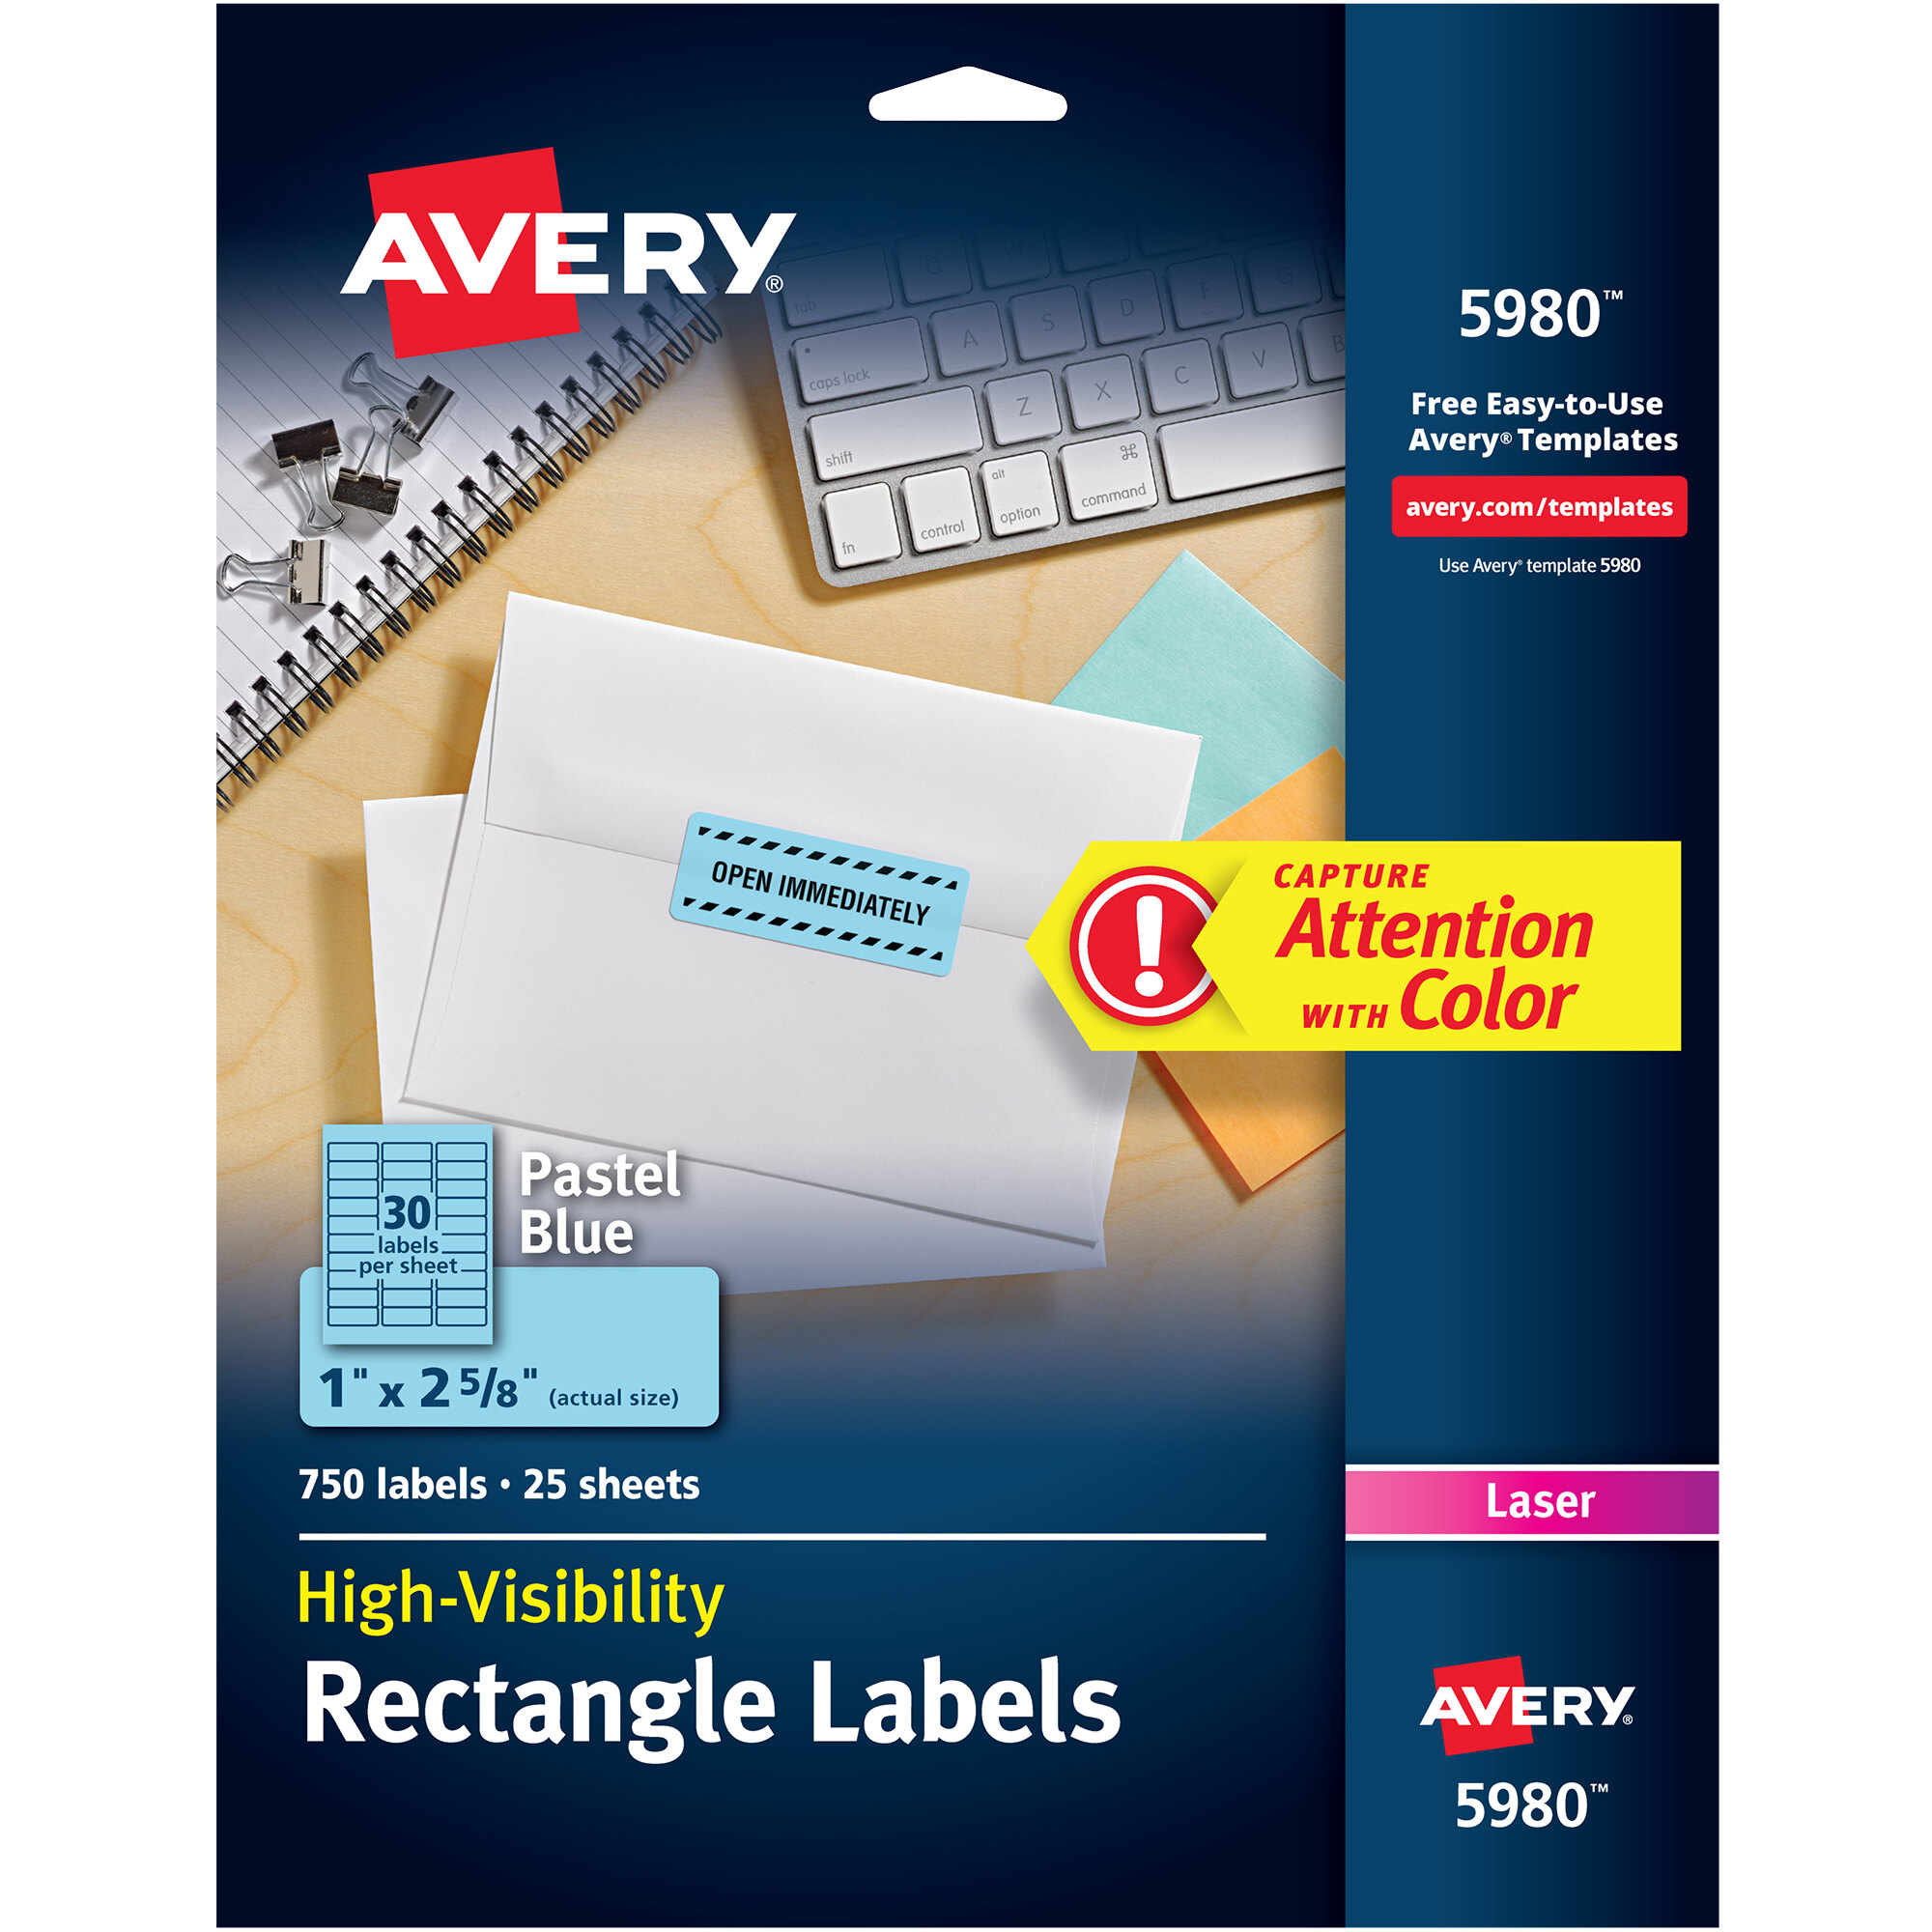 Avery 5980 1" x 2 5/8" Pastel Blue Permanent HighVisibility ID Labels